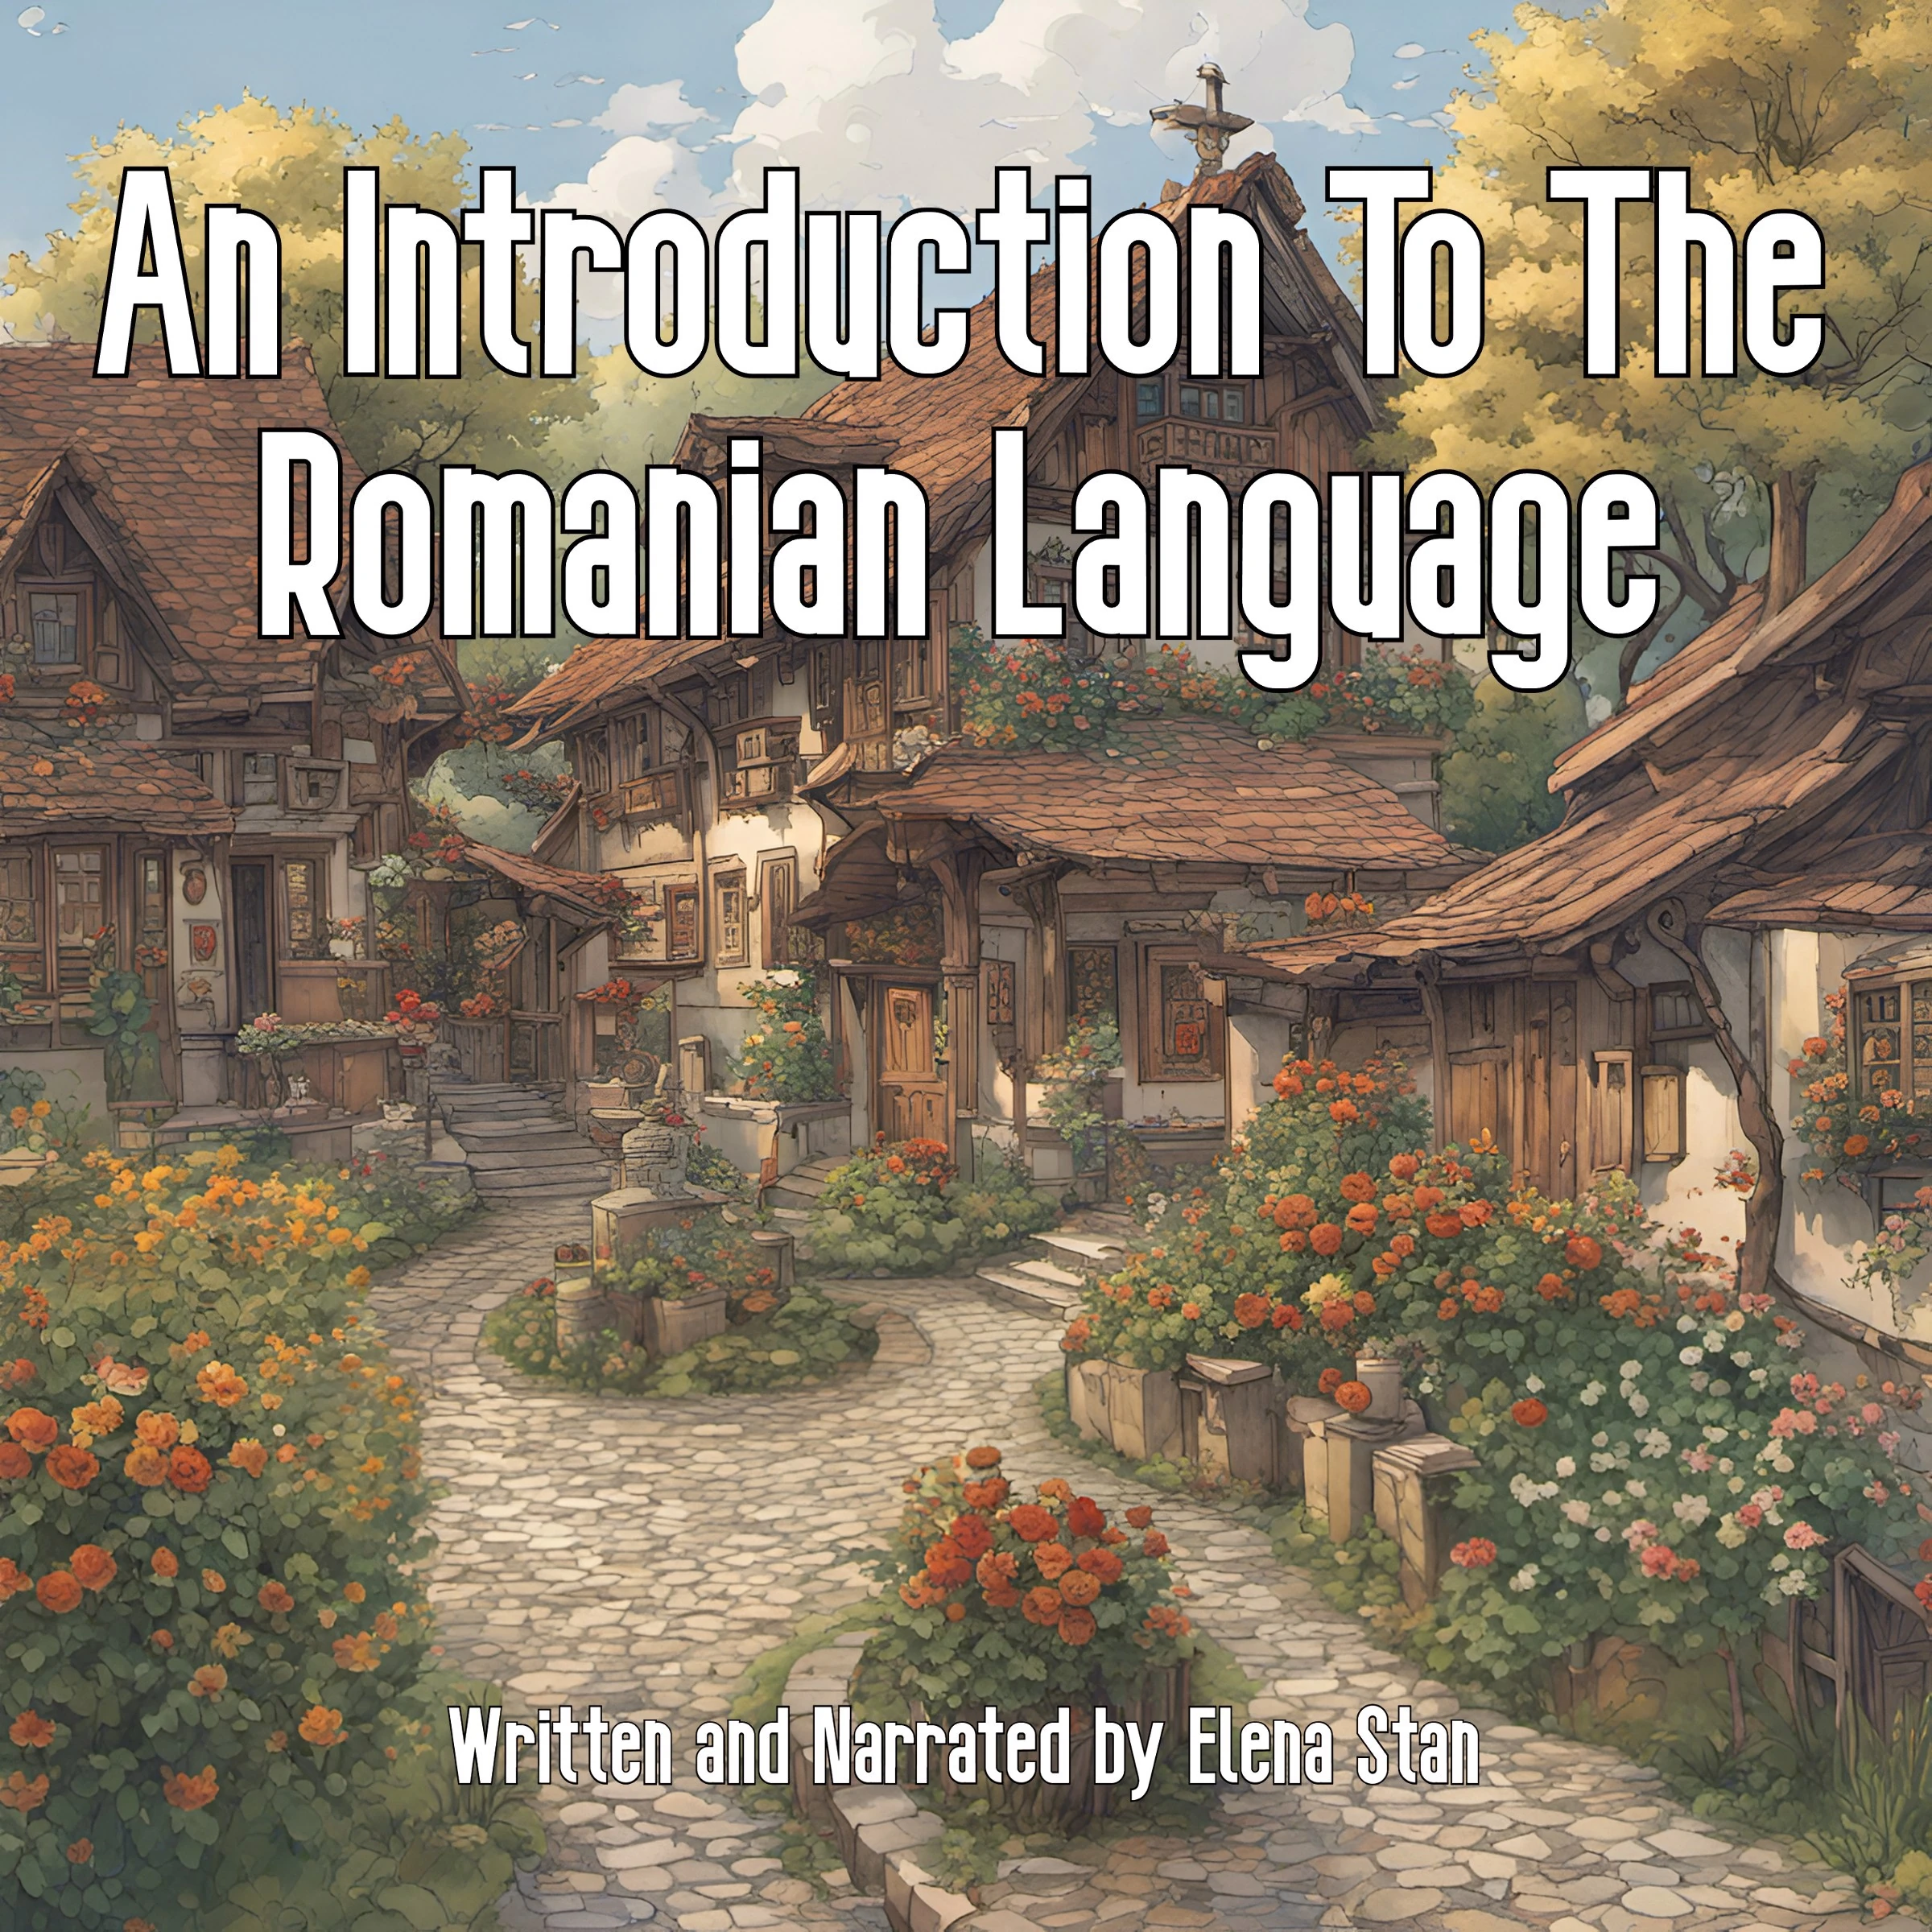 An Introduction To The Romanian Language Audiobook by Elena Stan